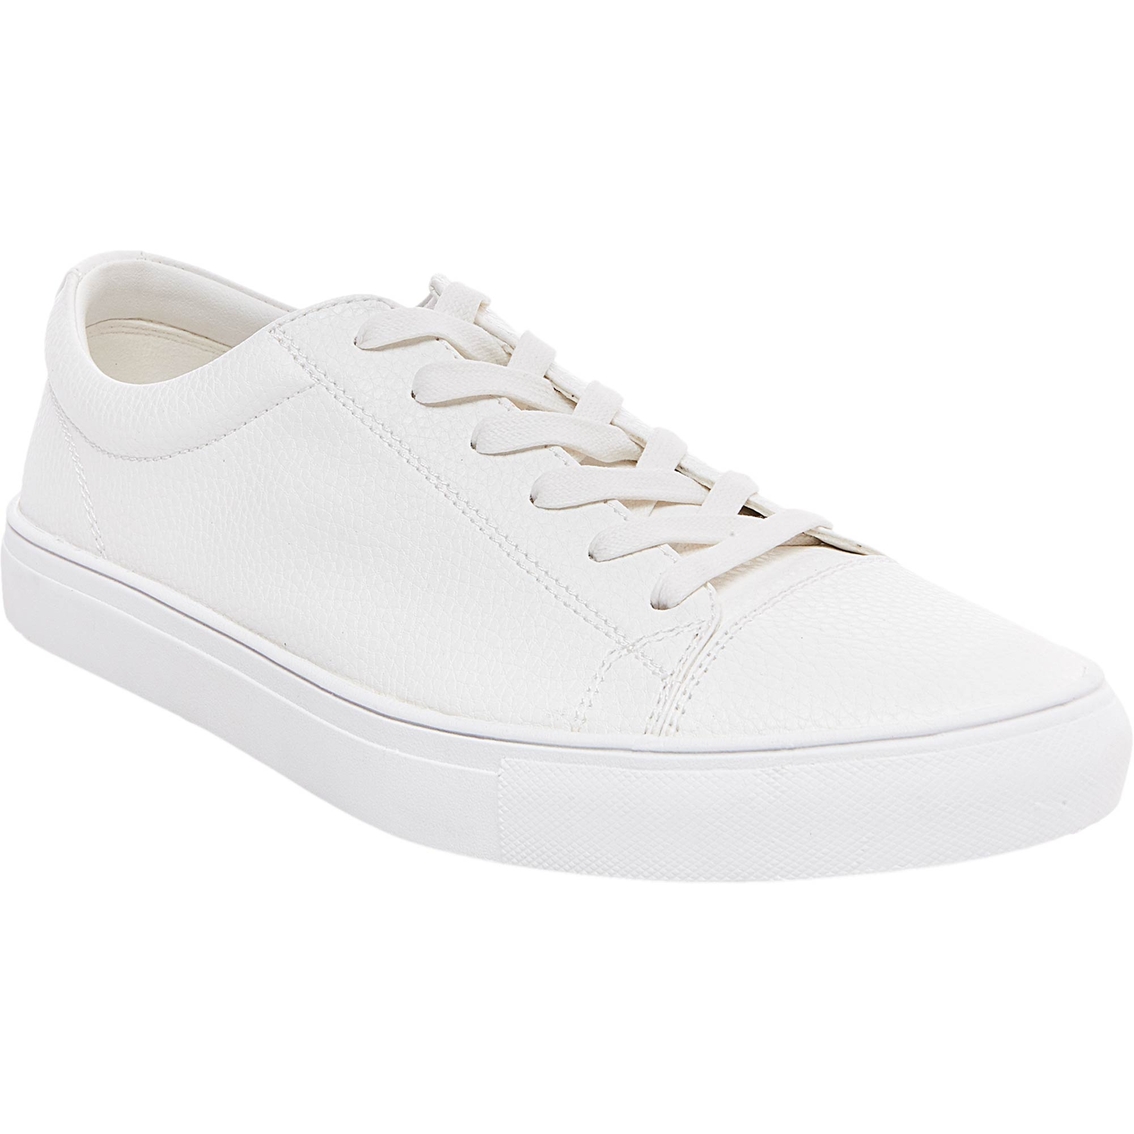 Steve Madden Men's Bounded Sneakers | Sneakers | Shoes | Shop The Exchange